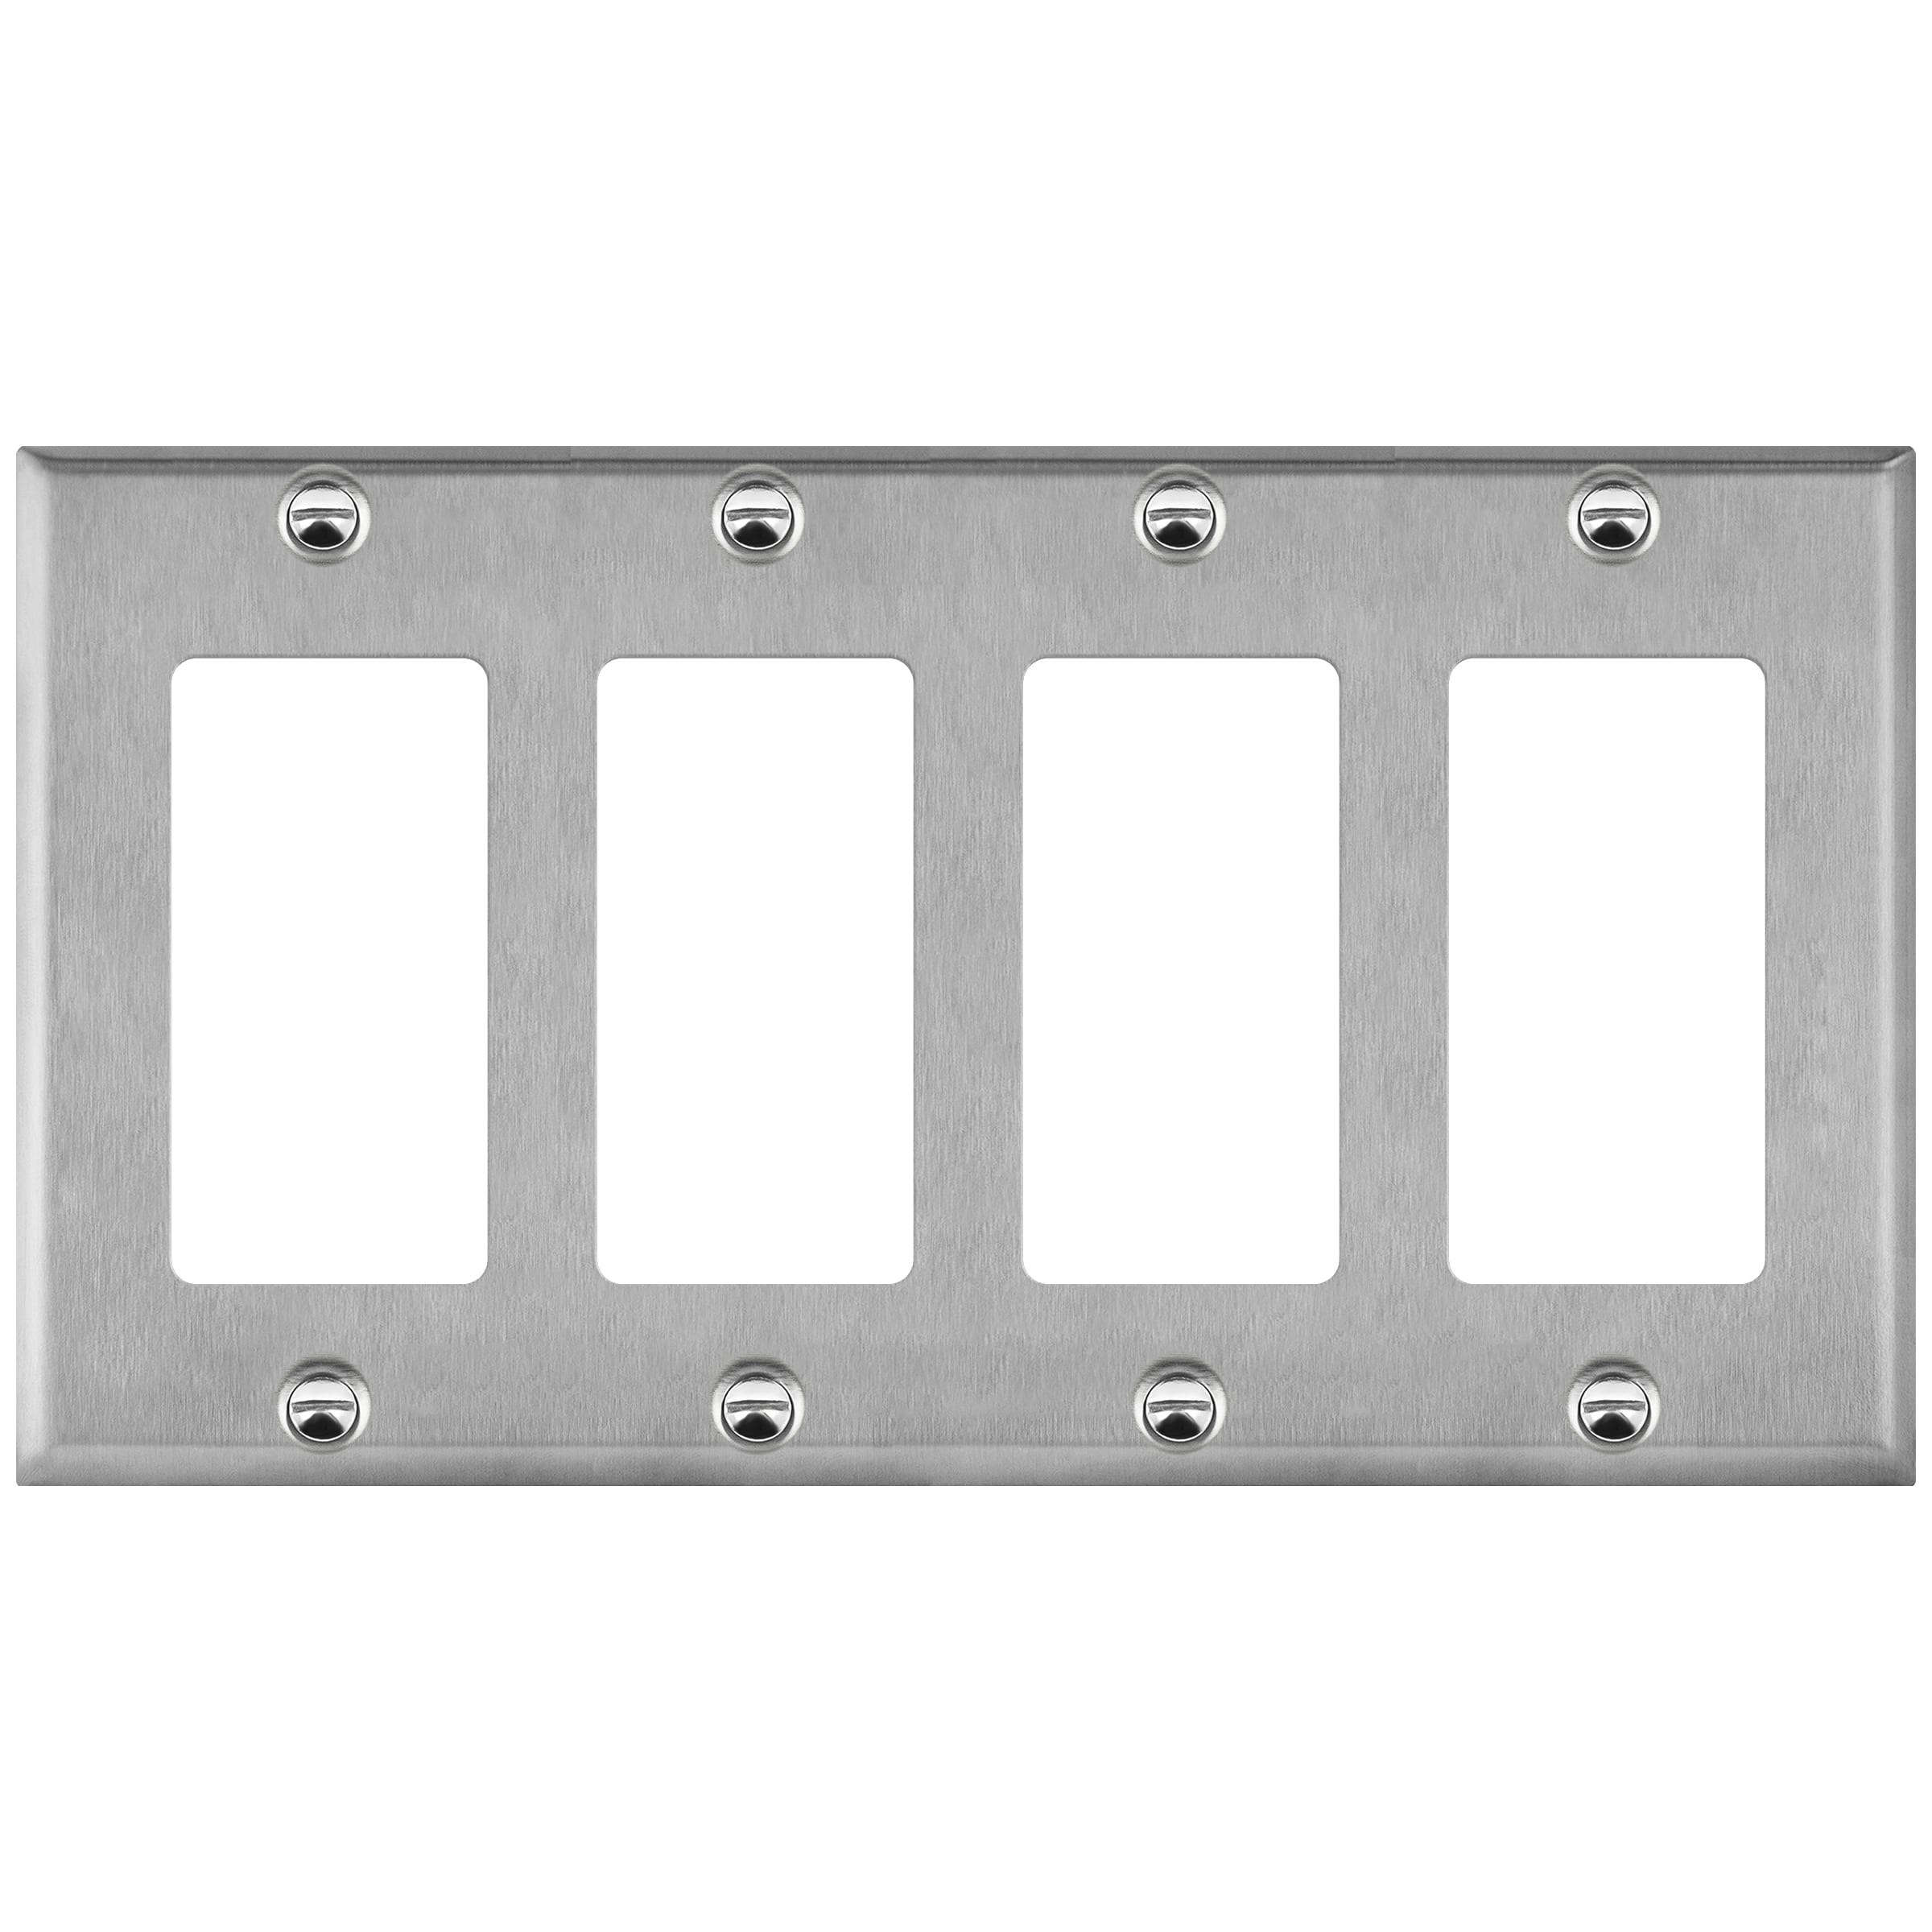 4-Gang Metal Decorator Outlet Wall Plate